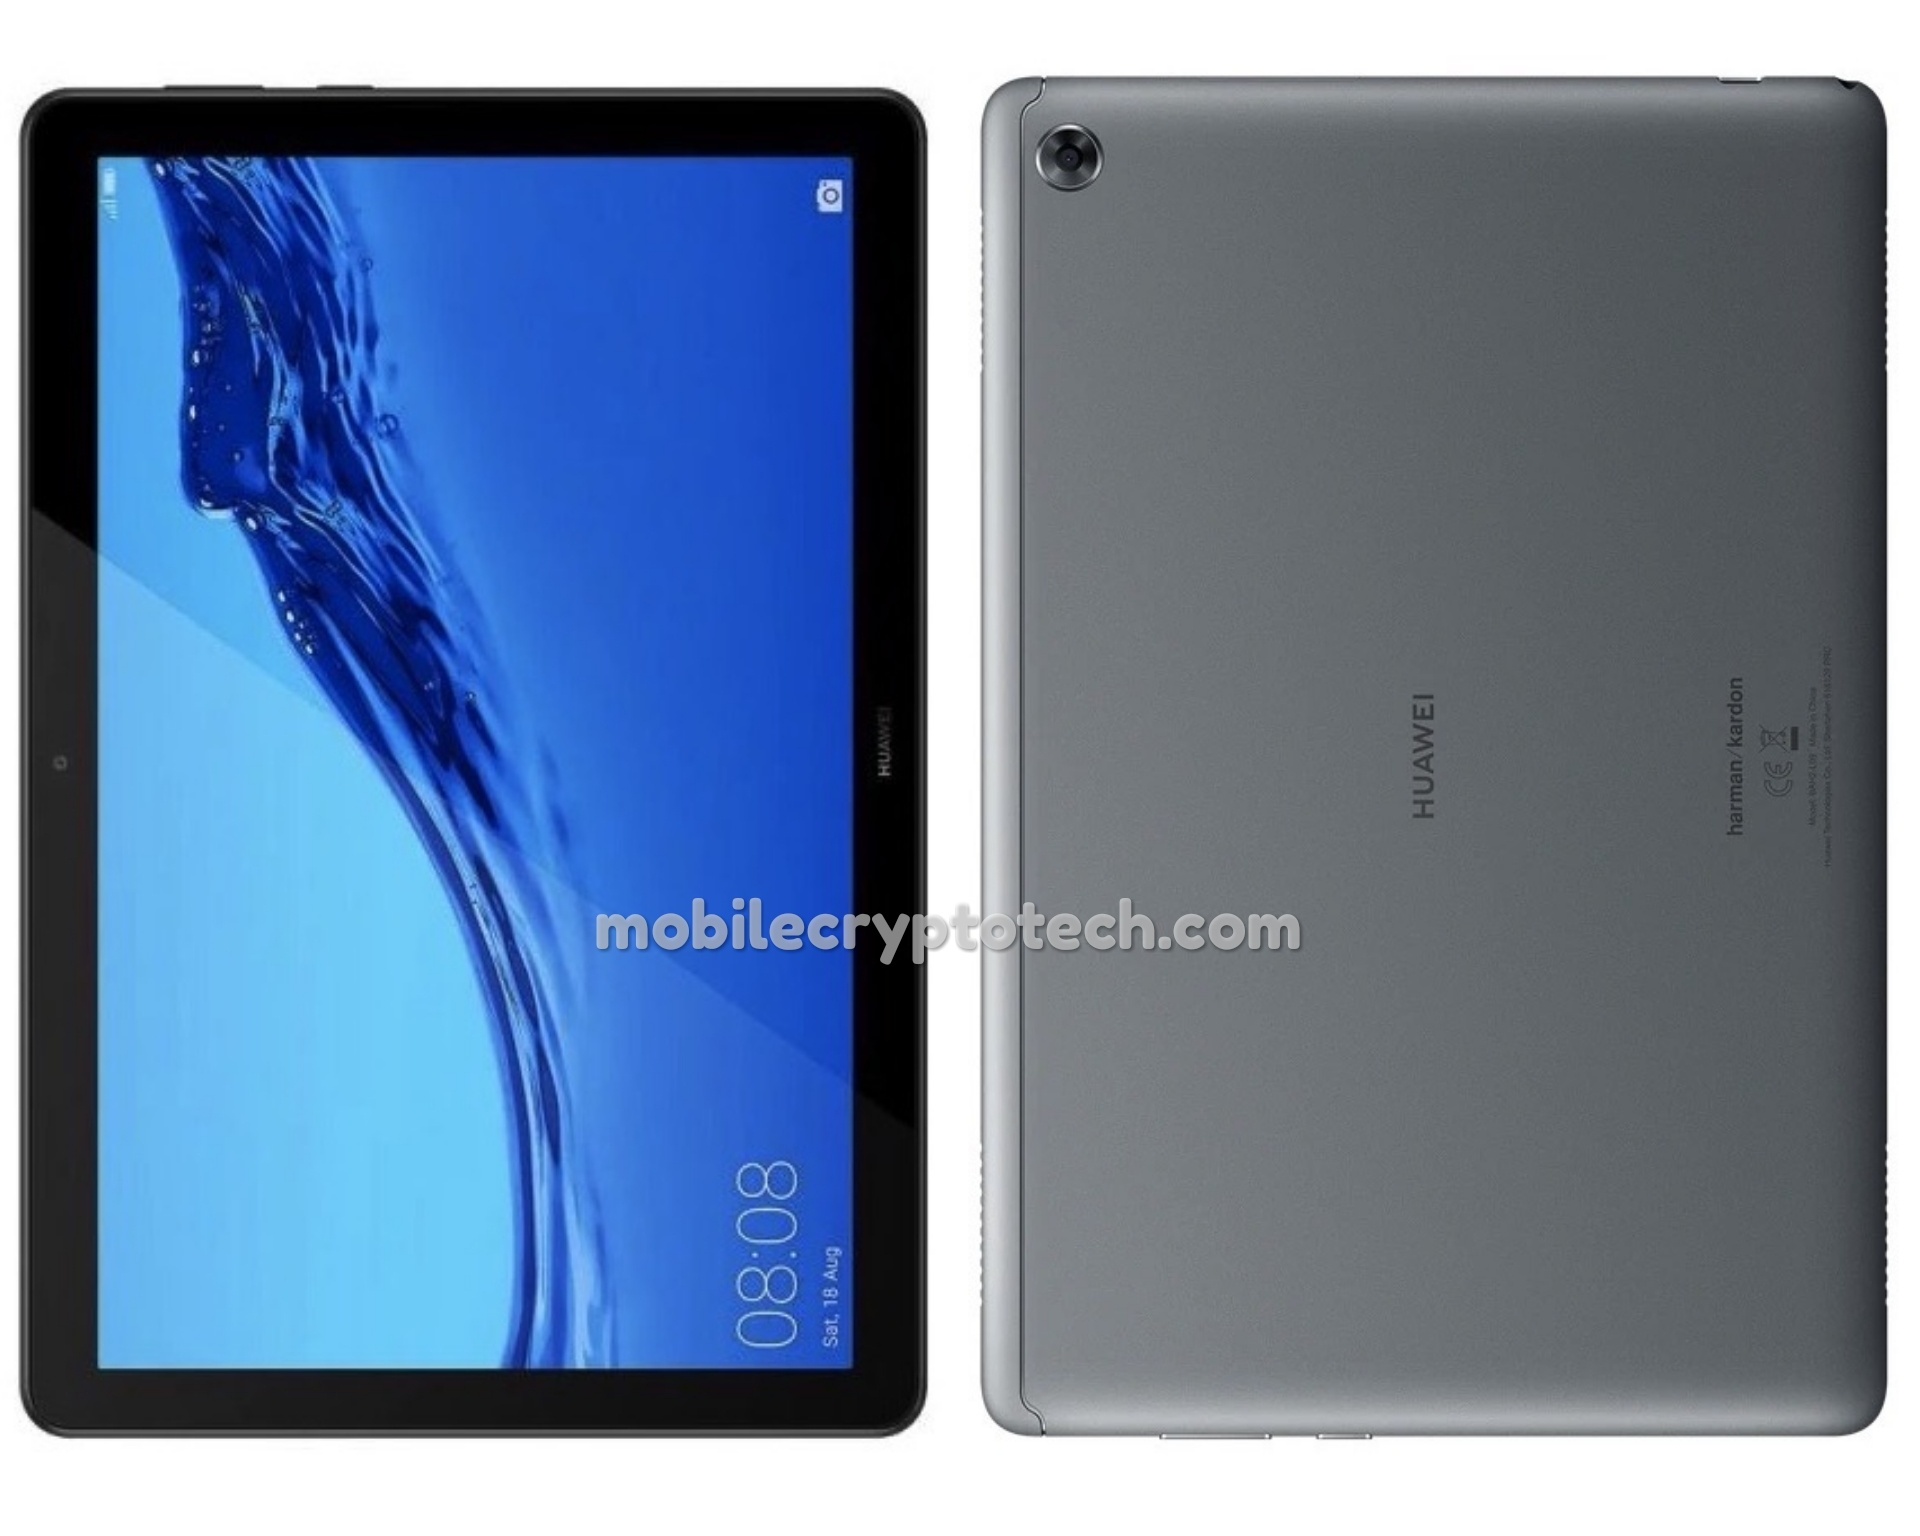 Huawei MediaPad M5 lite Specs, Video Review, Price and Buy